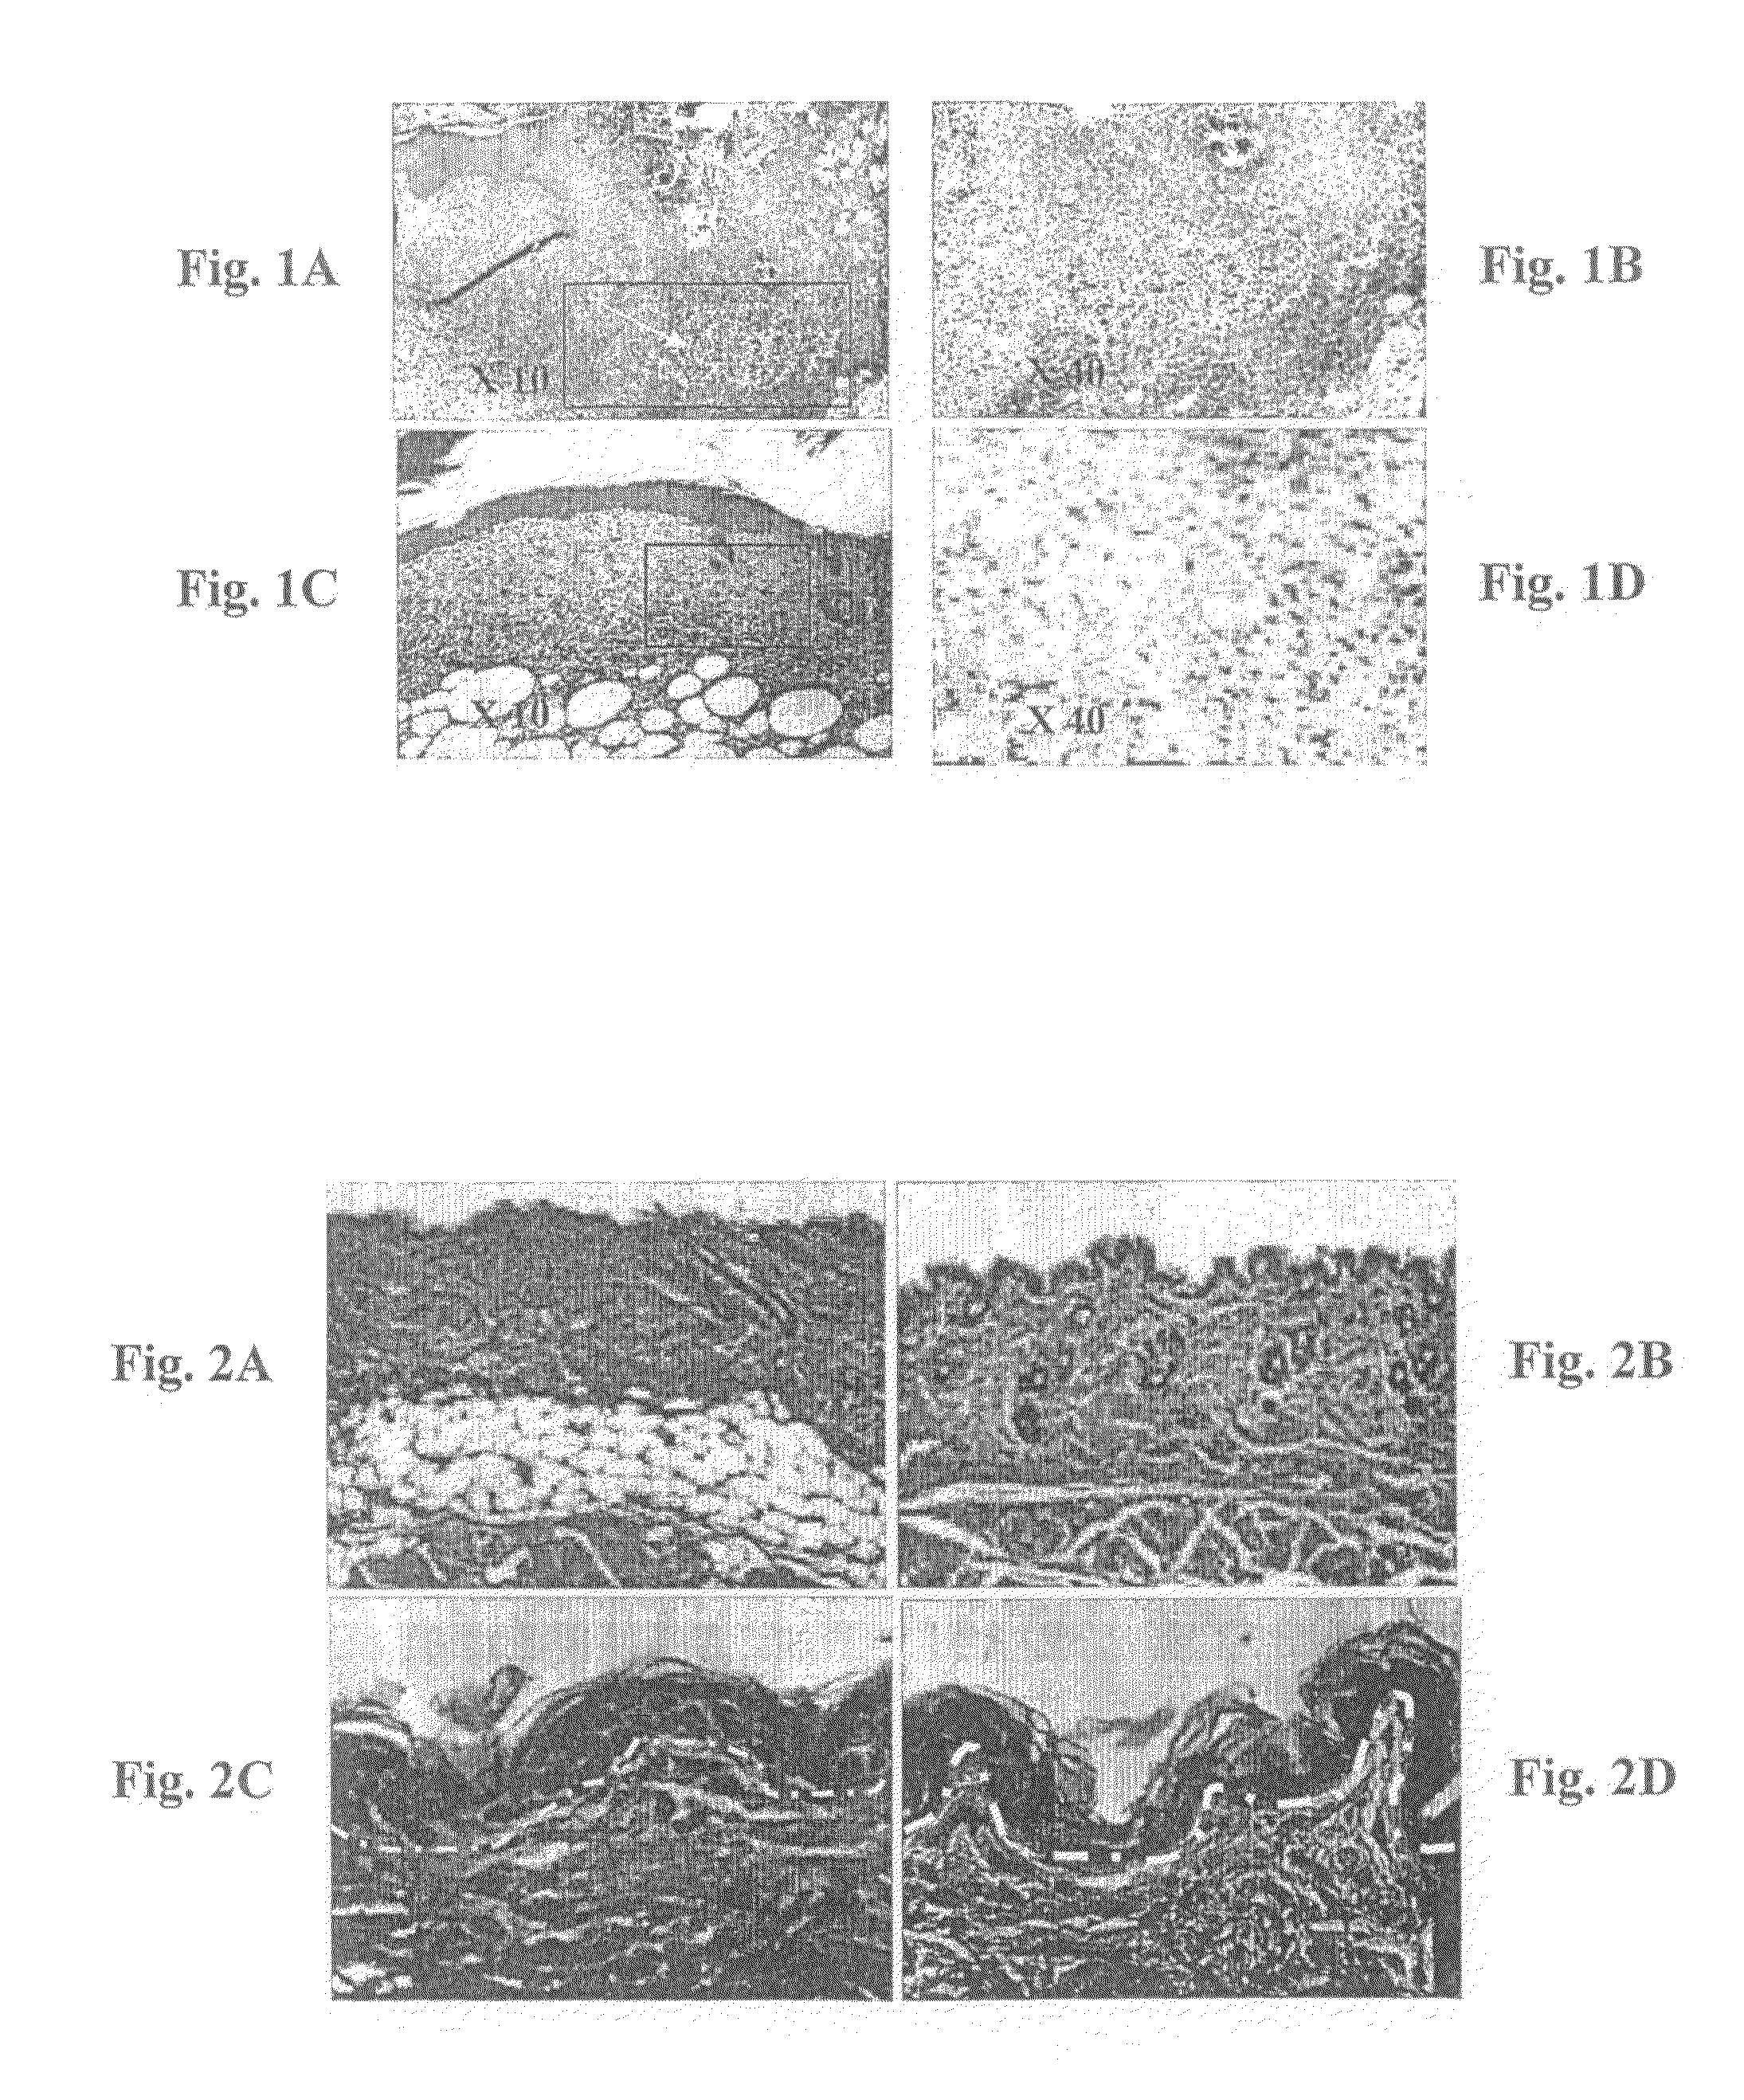 Method and compositions for prevention and treatment of diabetic and aged skin